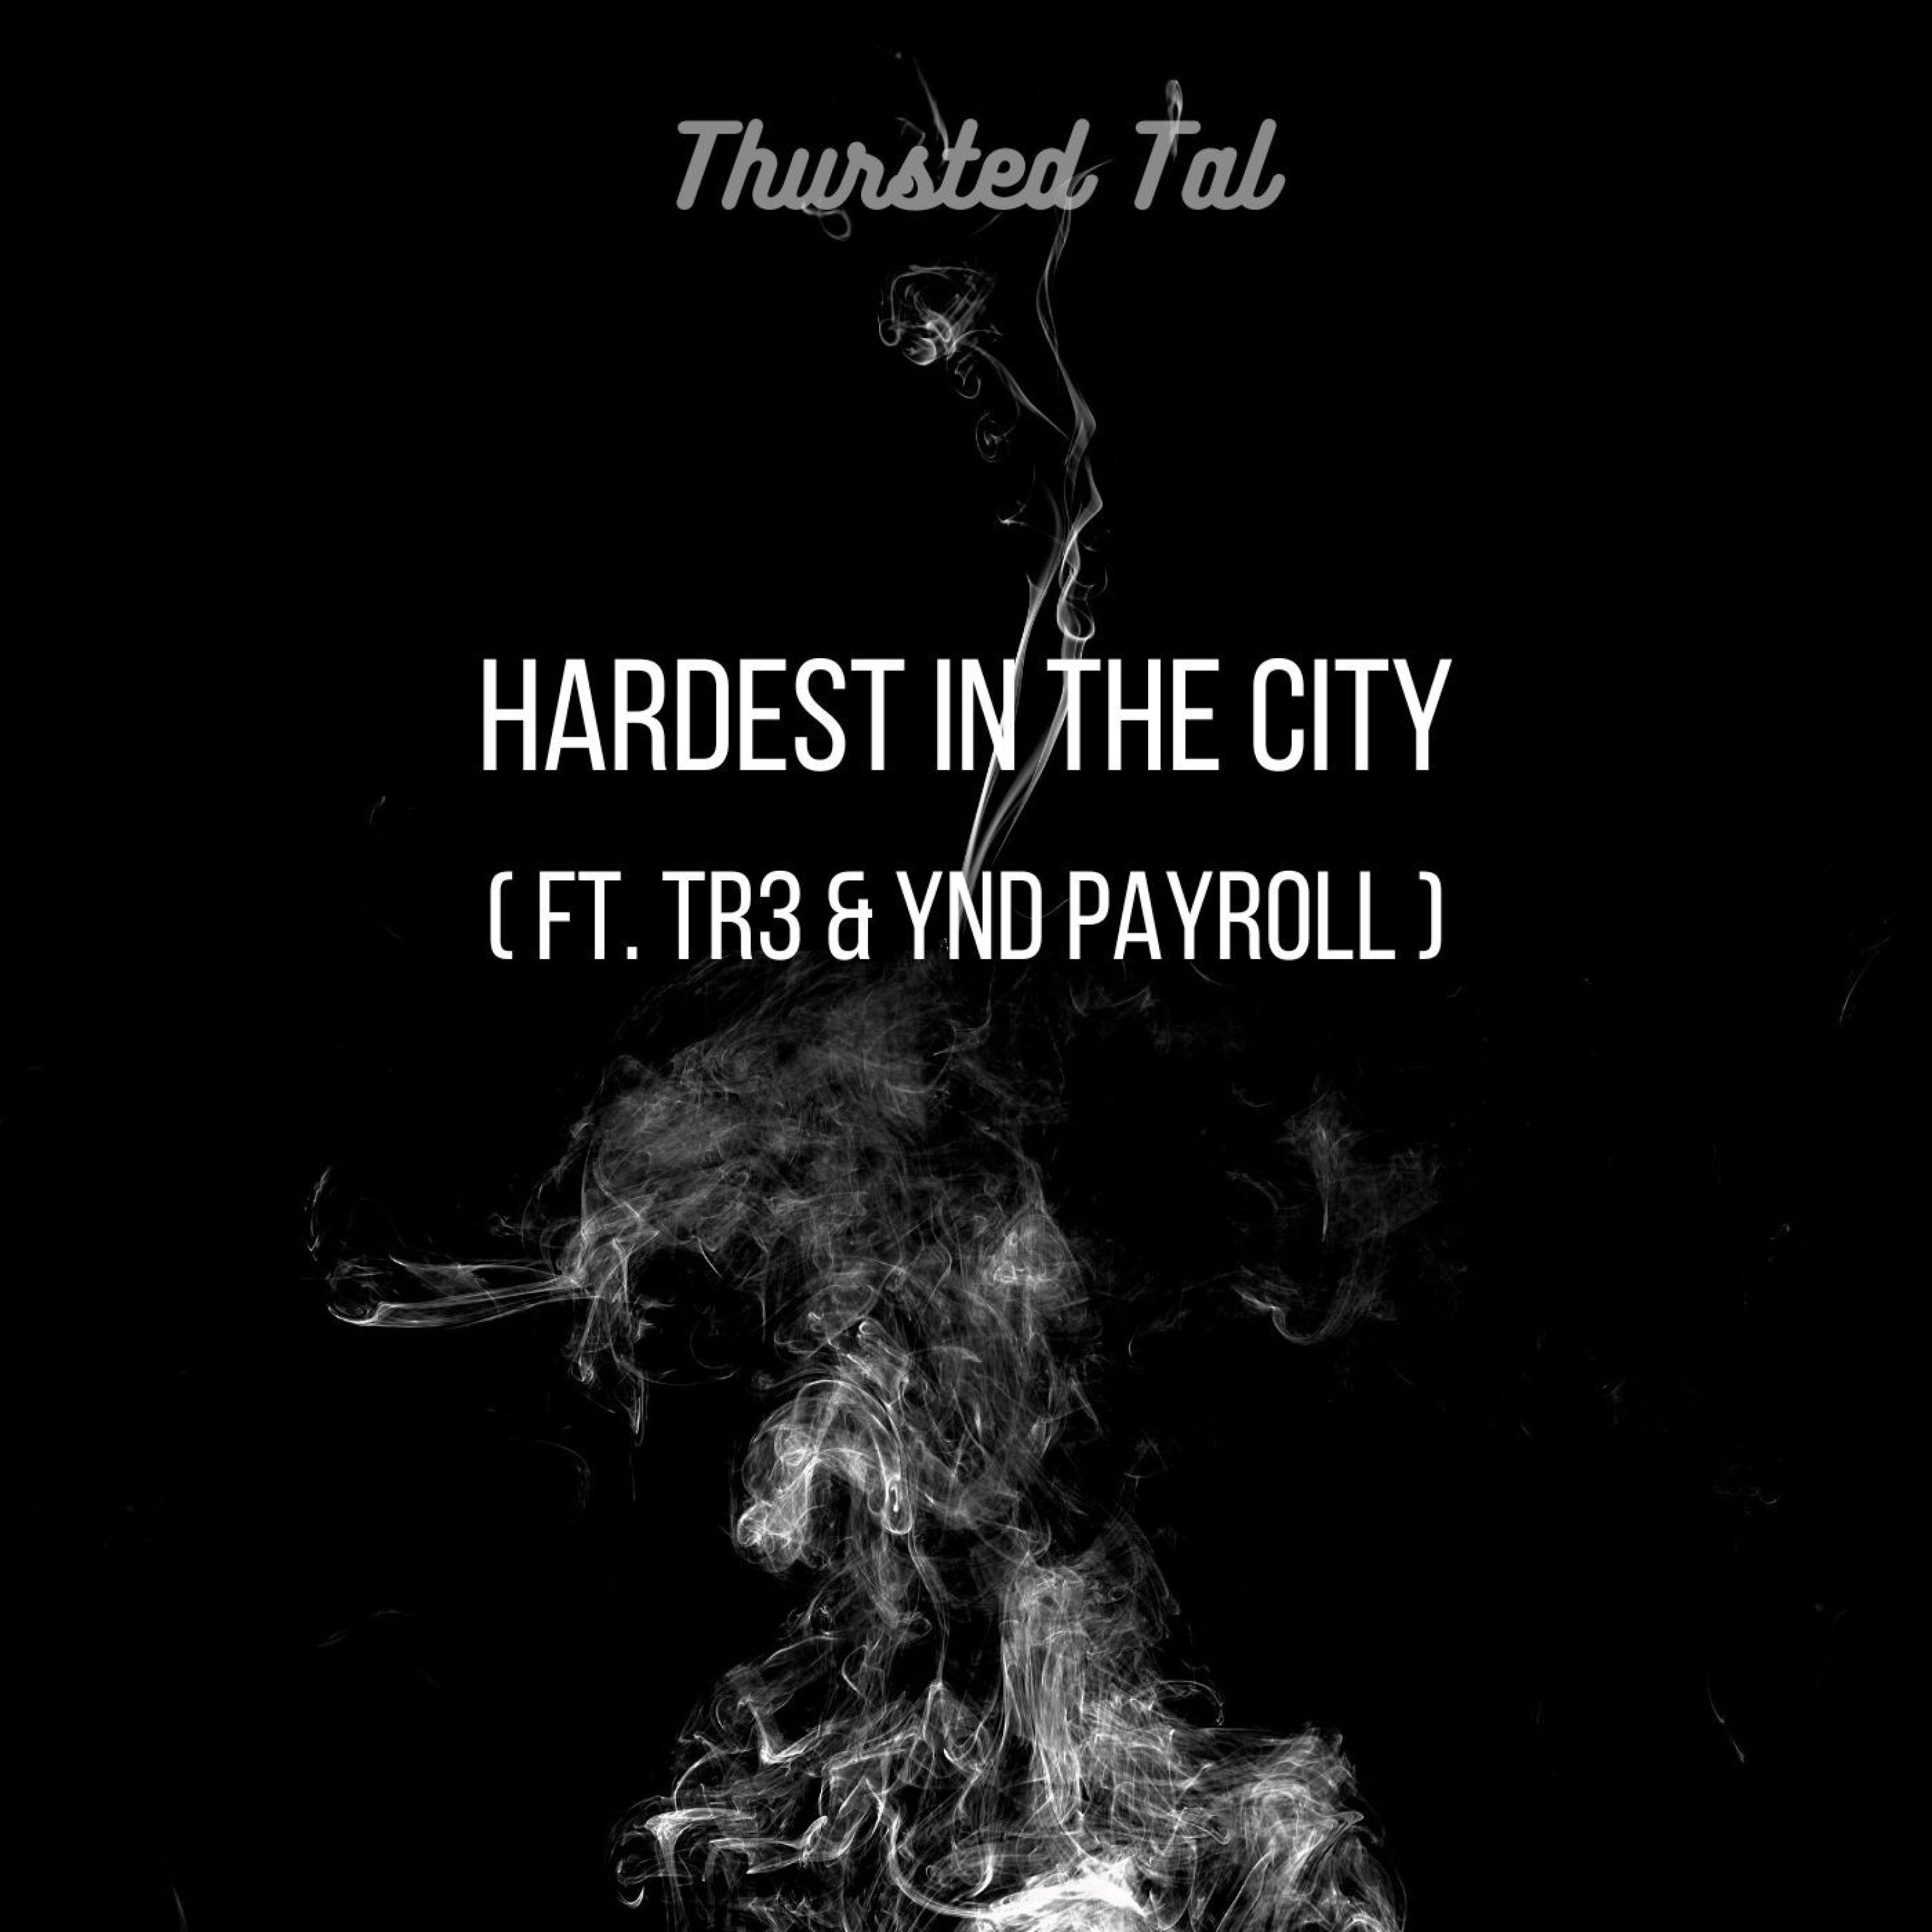 Thursted Tal - Hardest In The City (feat. Tr3 & YND Payroll)